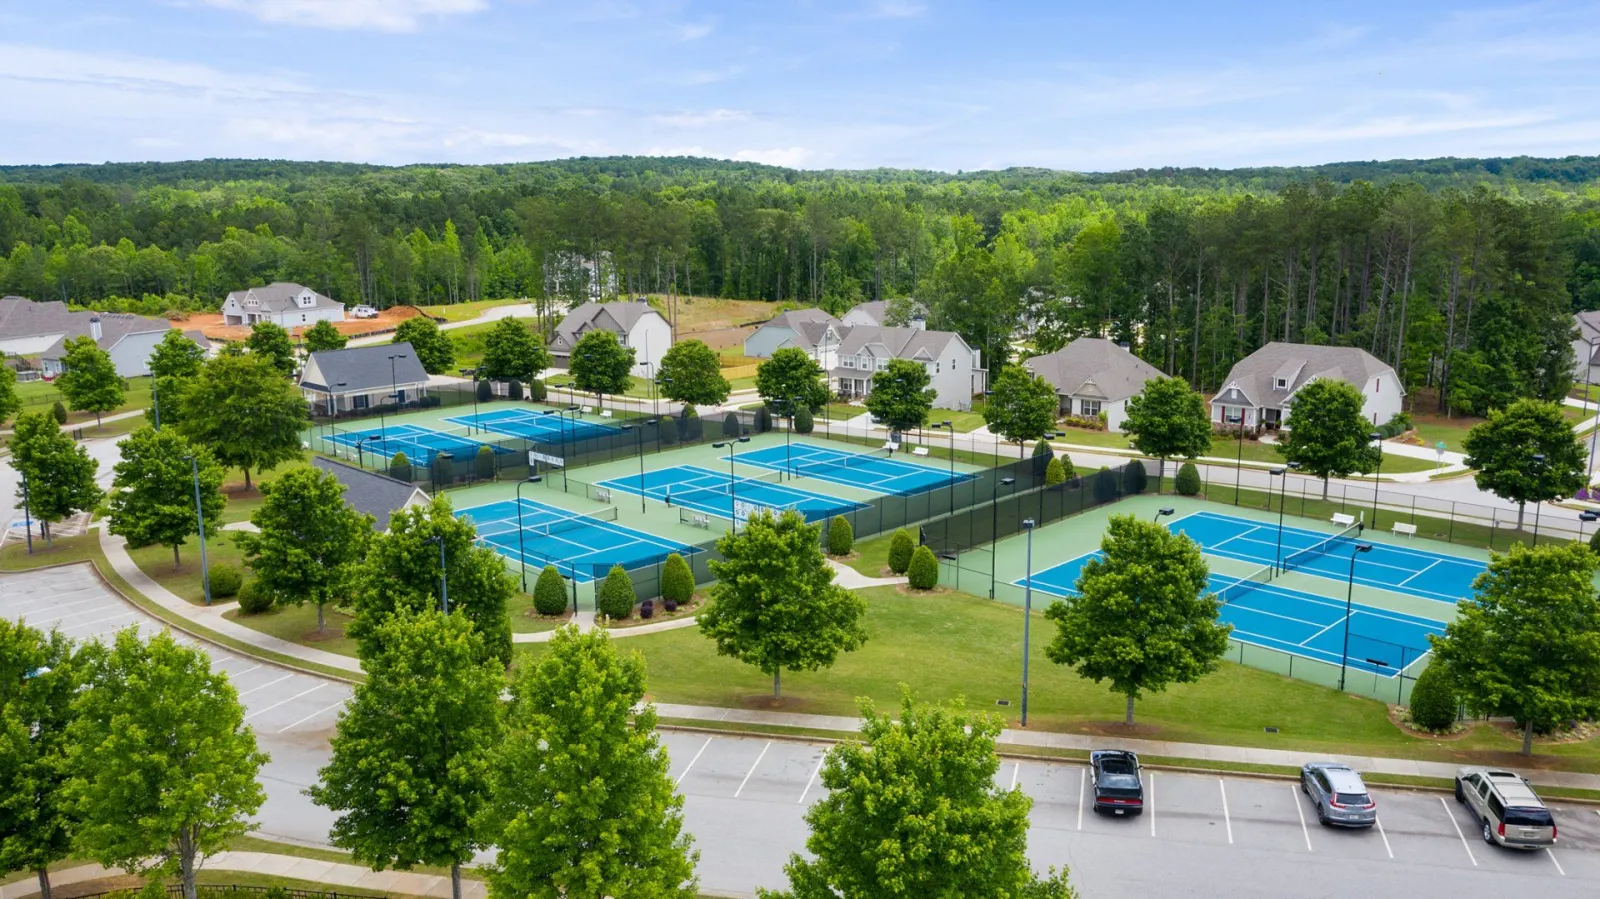 an overhead view of the tennis courts at The Georgian